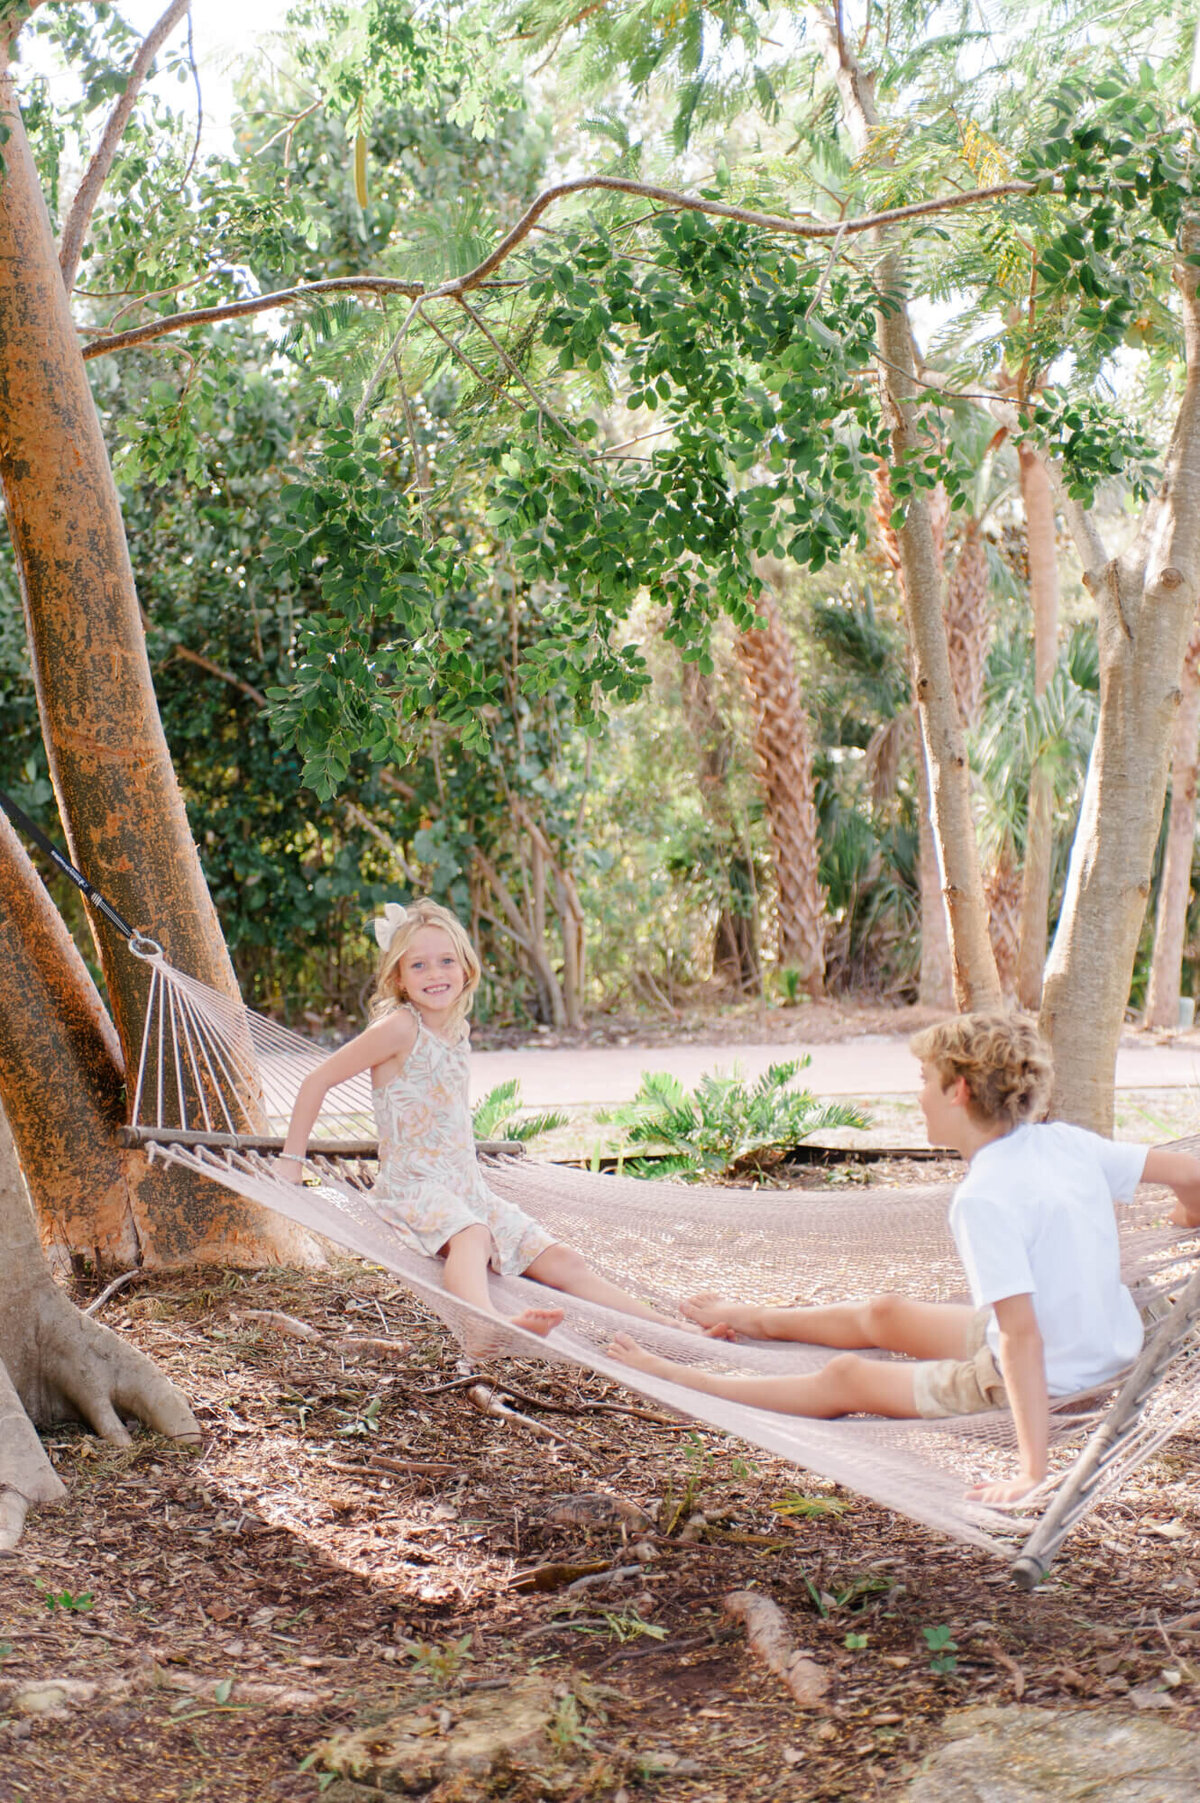 Kids playing in a hammock during their family photography session in Orlando, Florida.